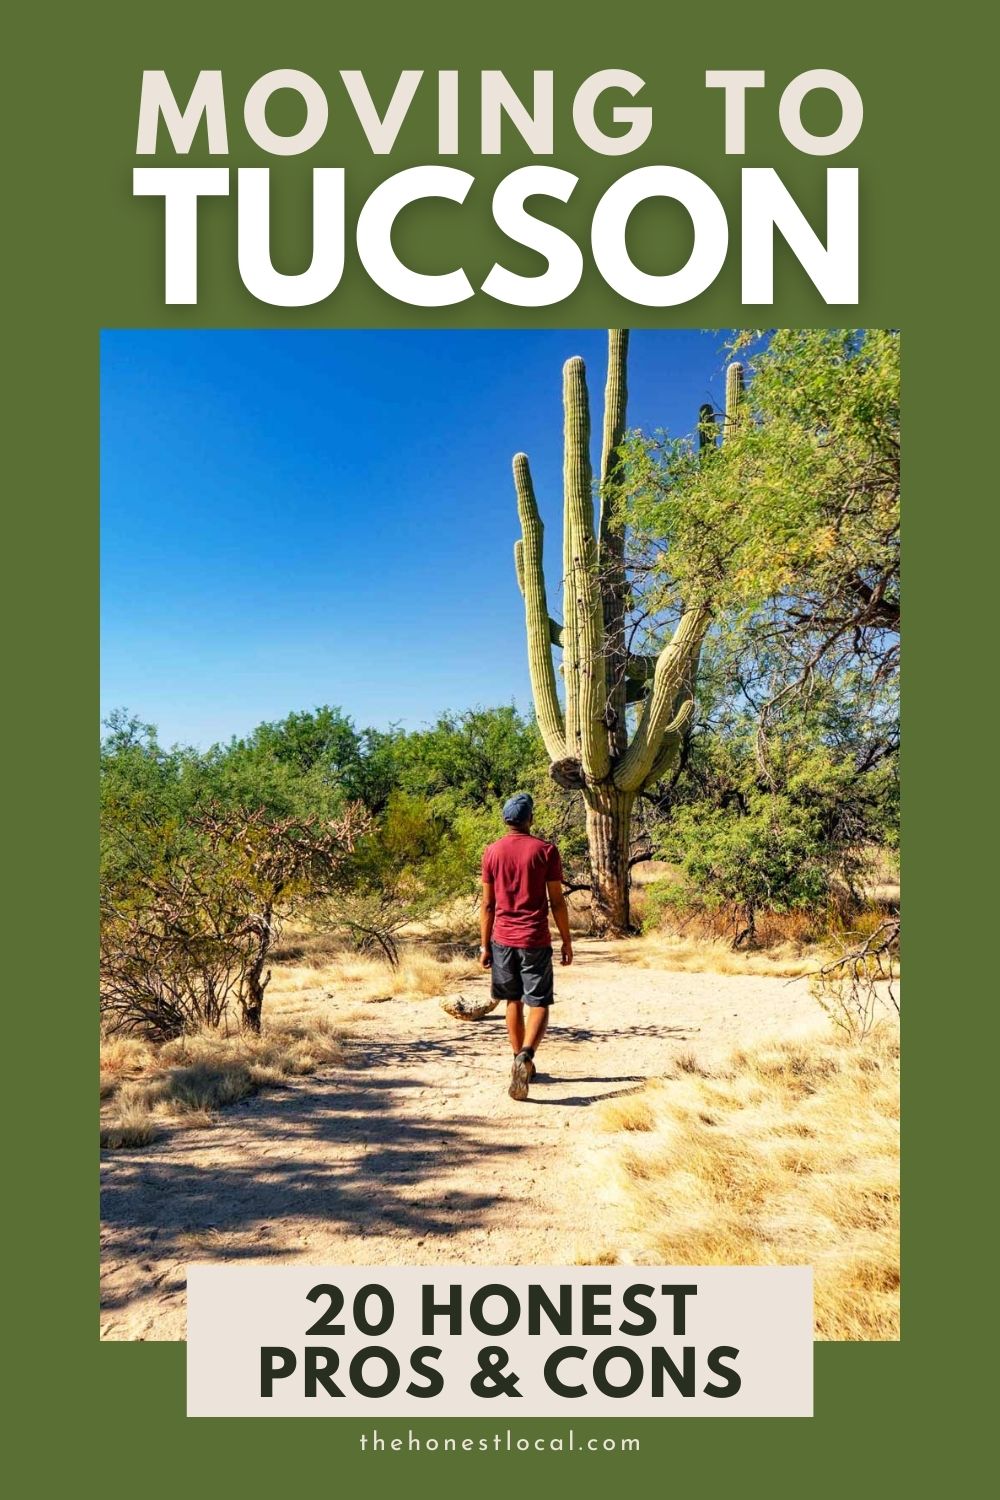 Pros and cons of living in Tucson